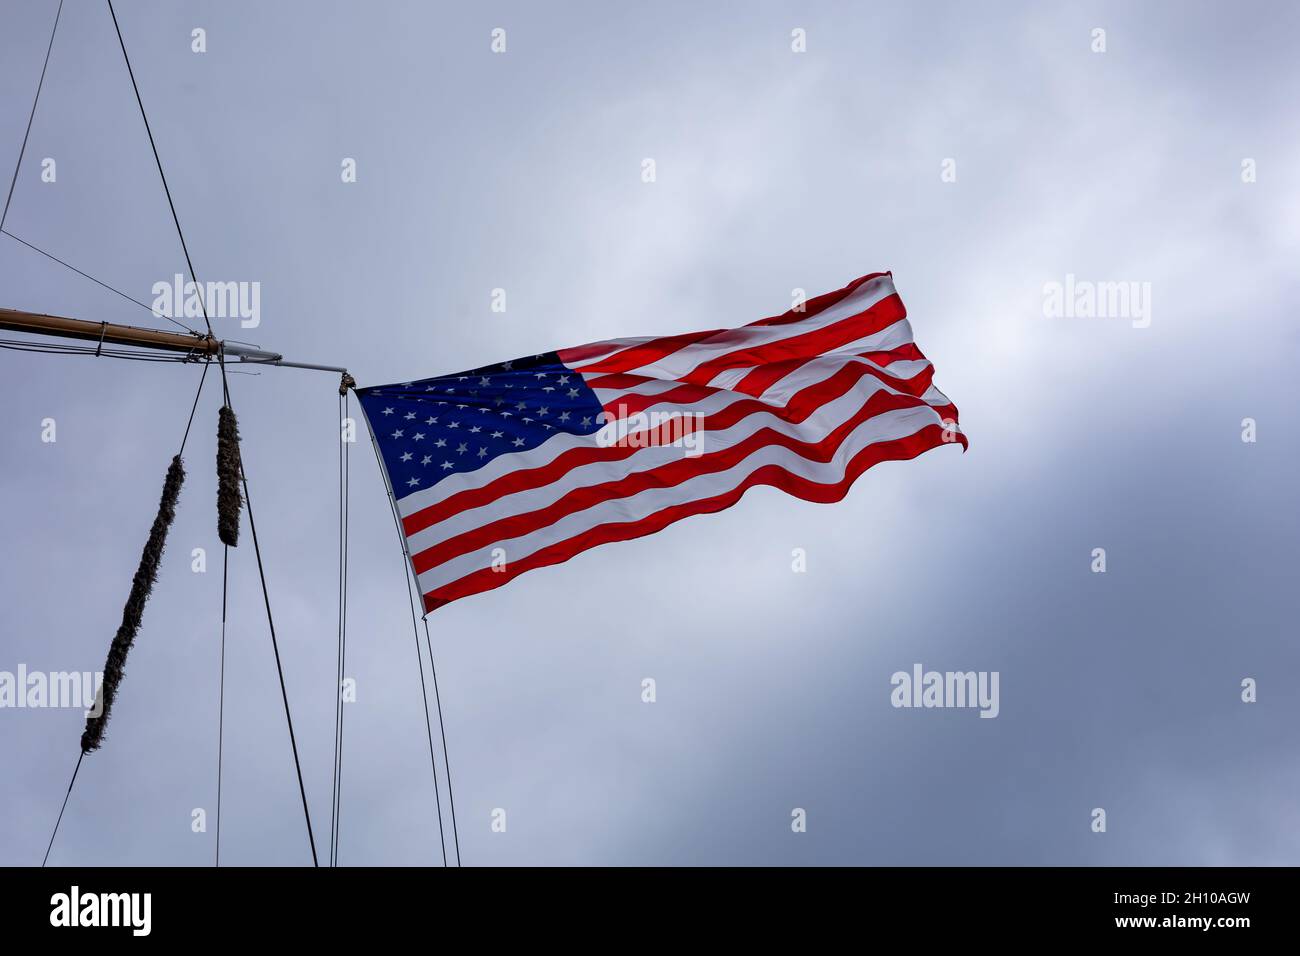 A national flag of United States of America, fluttering in the wind on the ship mast. Stock Photo